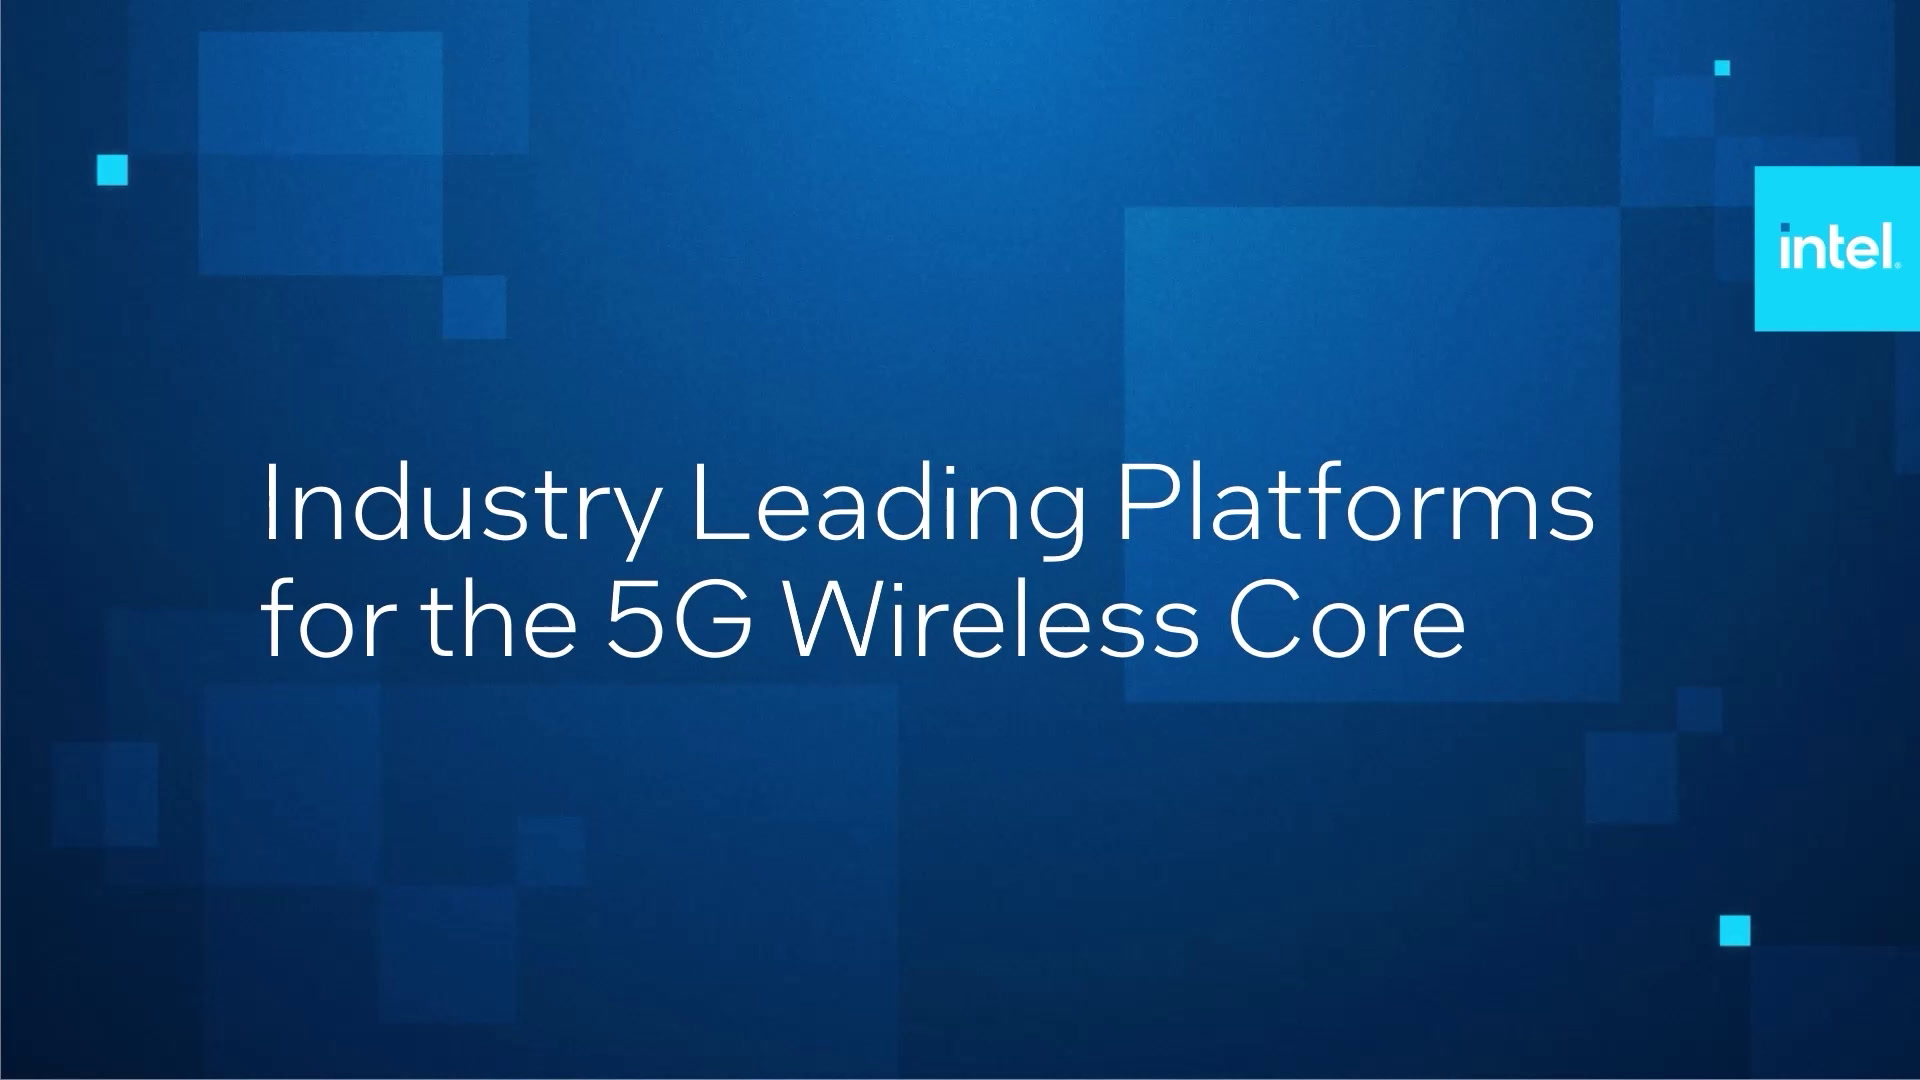 Chapter 1: 5G Wireless Core Transition and Trends